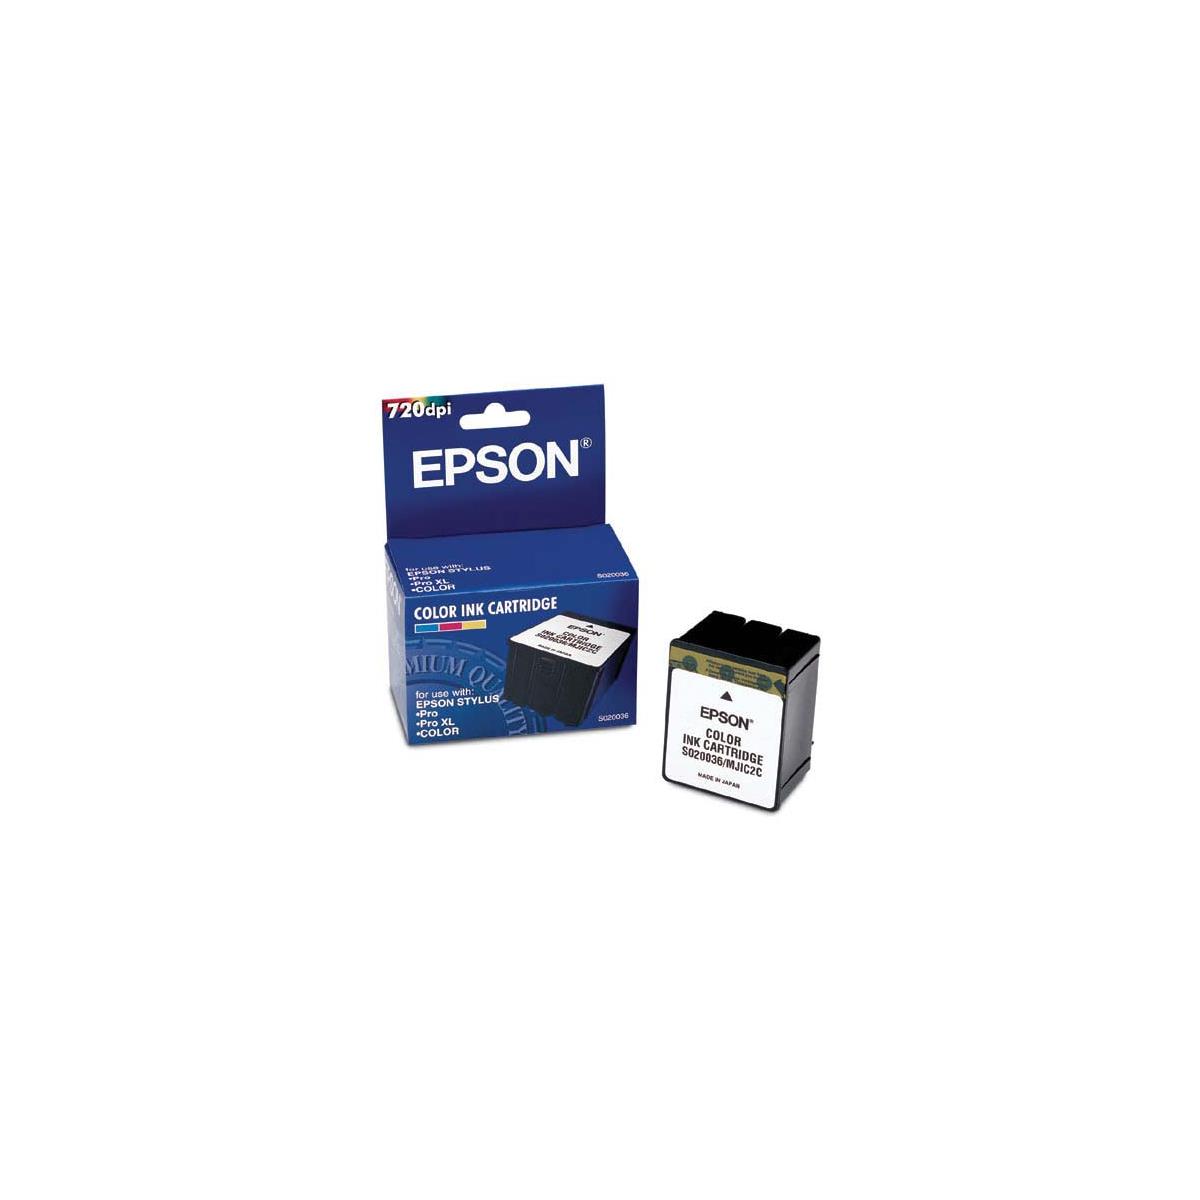 Image of Epson Color Ink Cartridge for the Stylus Color